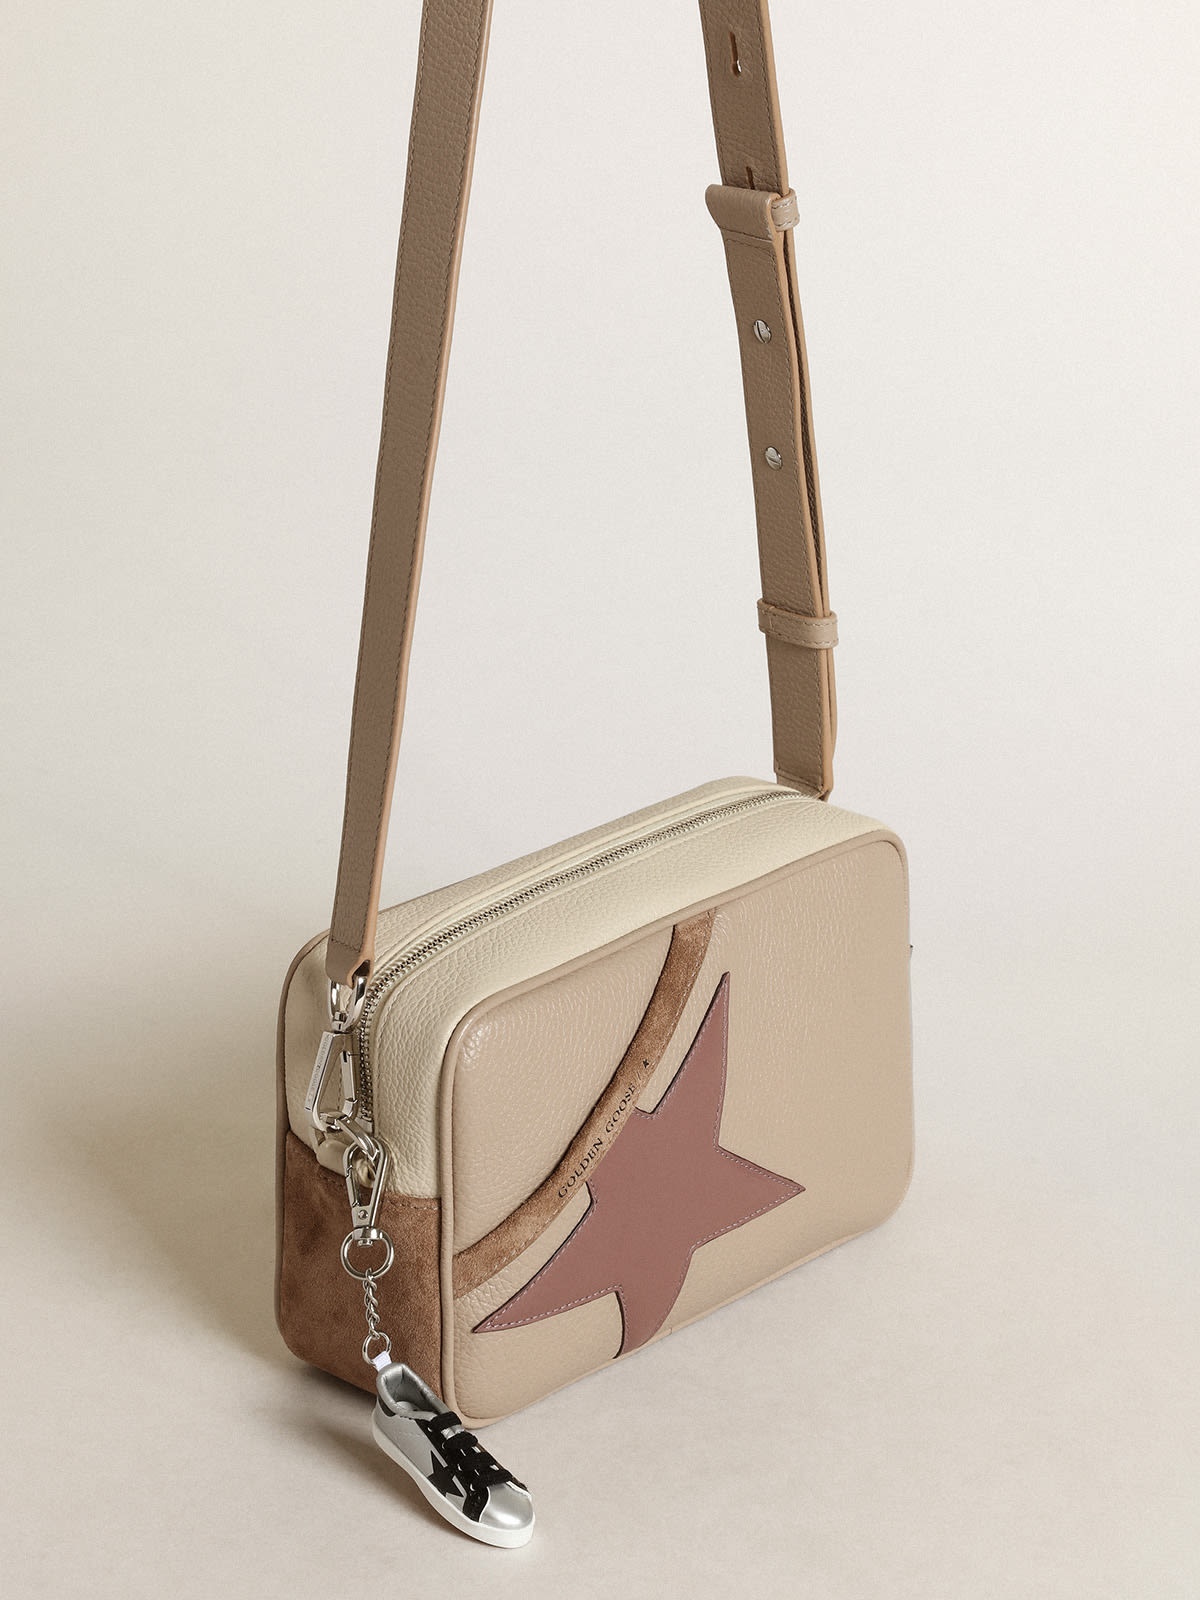 Large Star Bag in off-white hammered leather and cappuccino-colored suede with purple leather star - 2